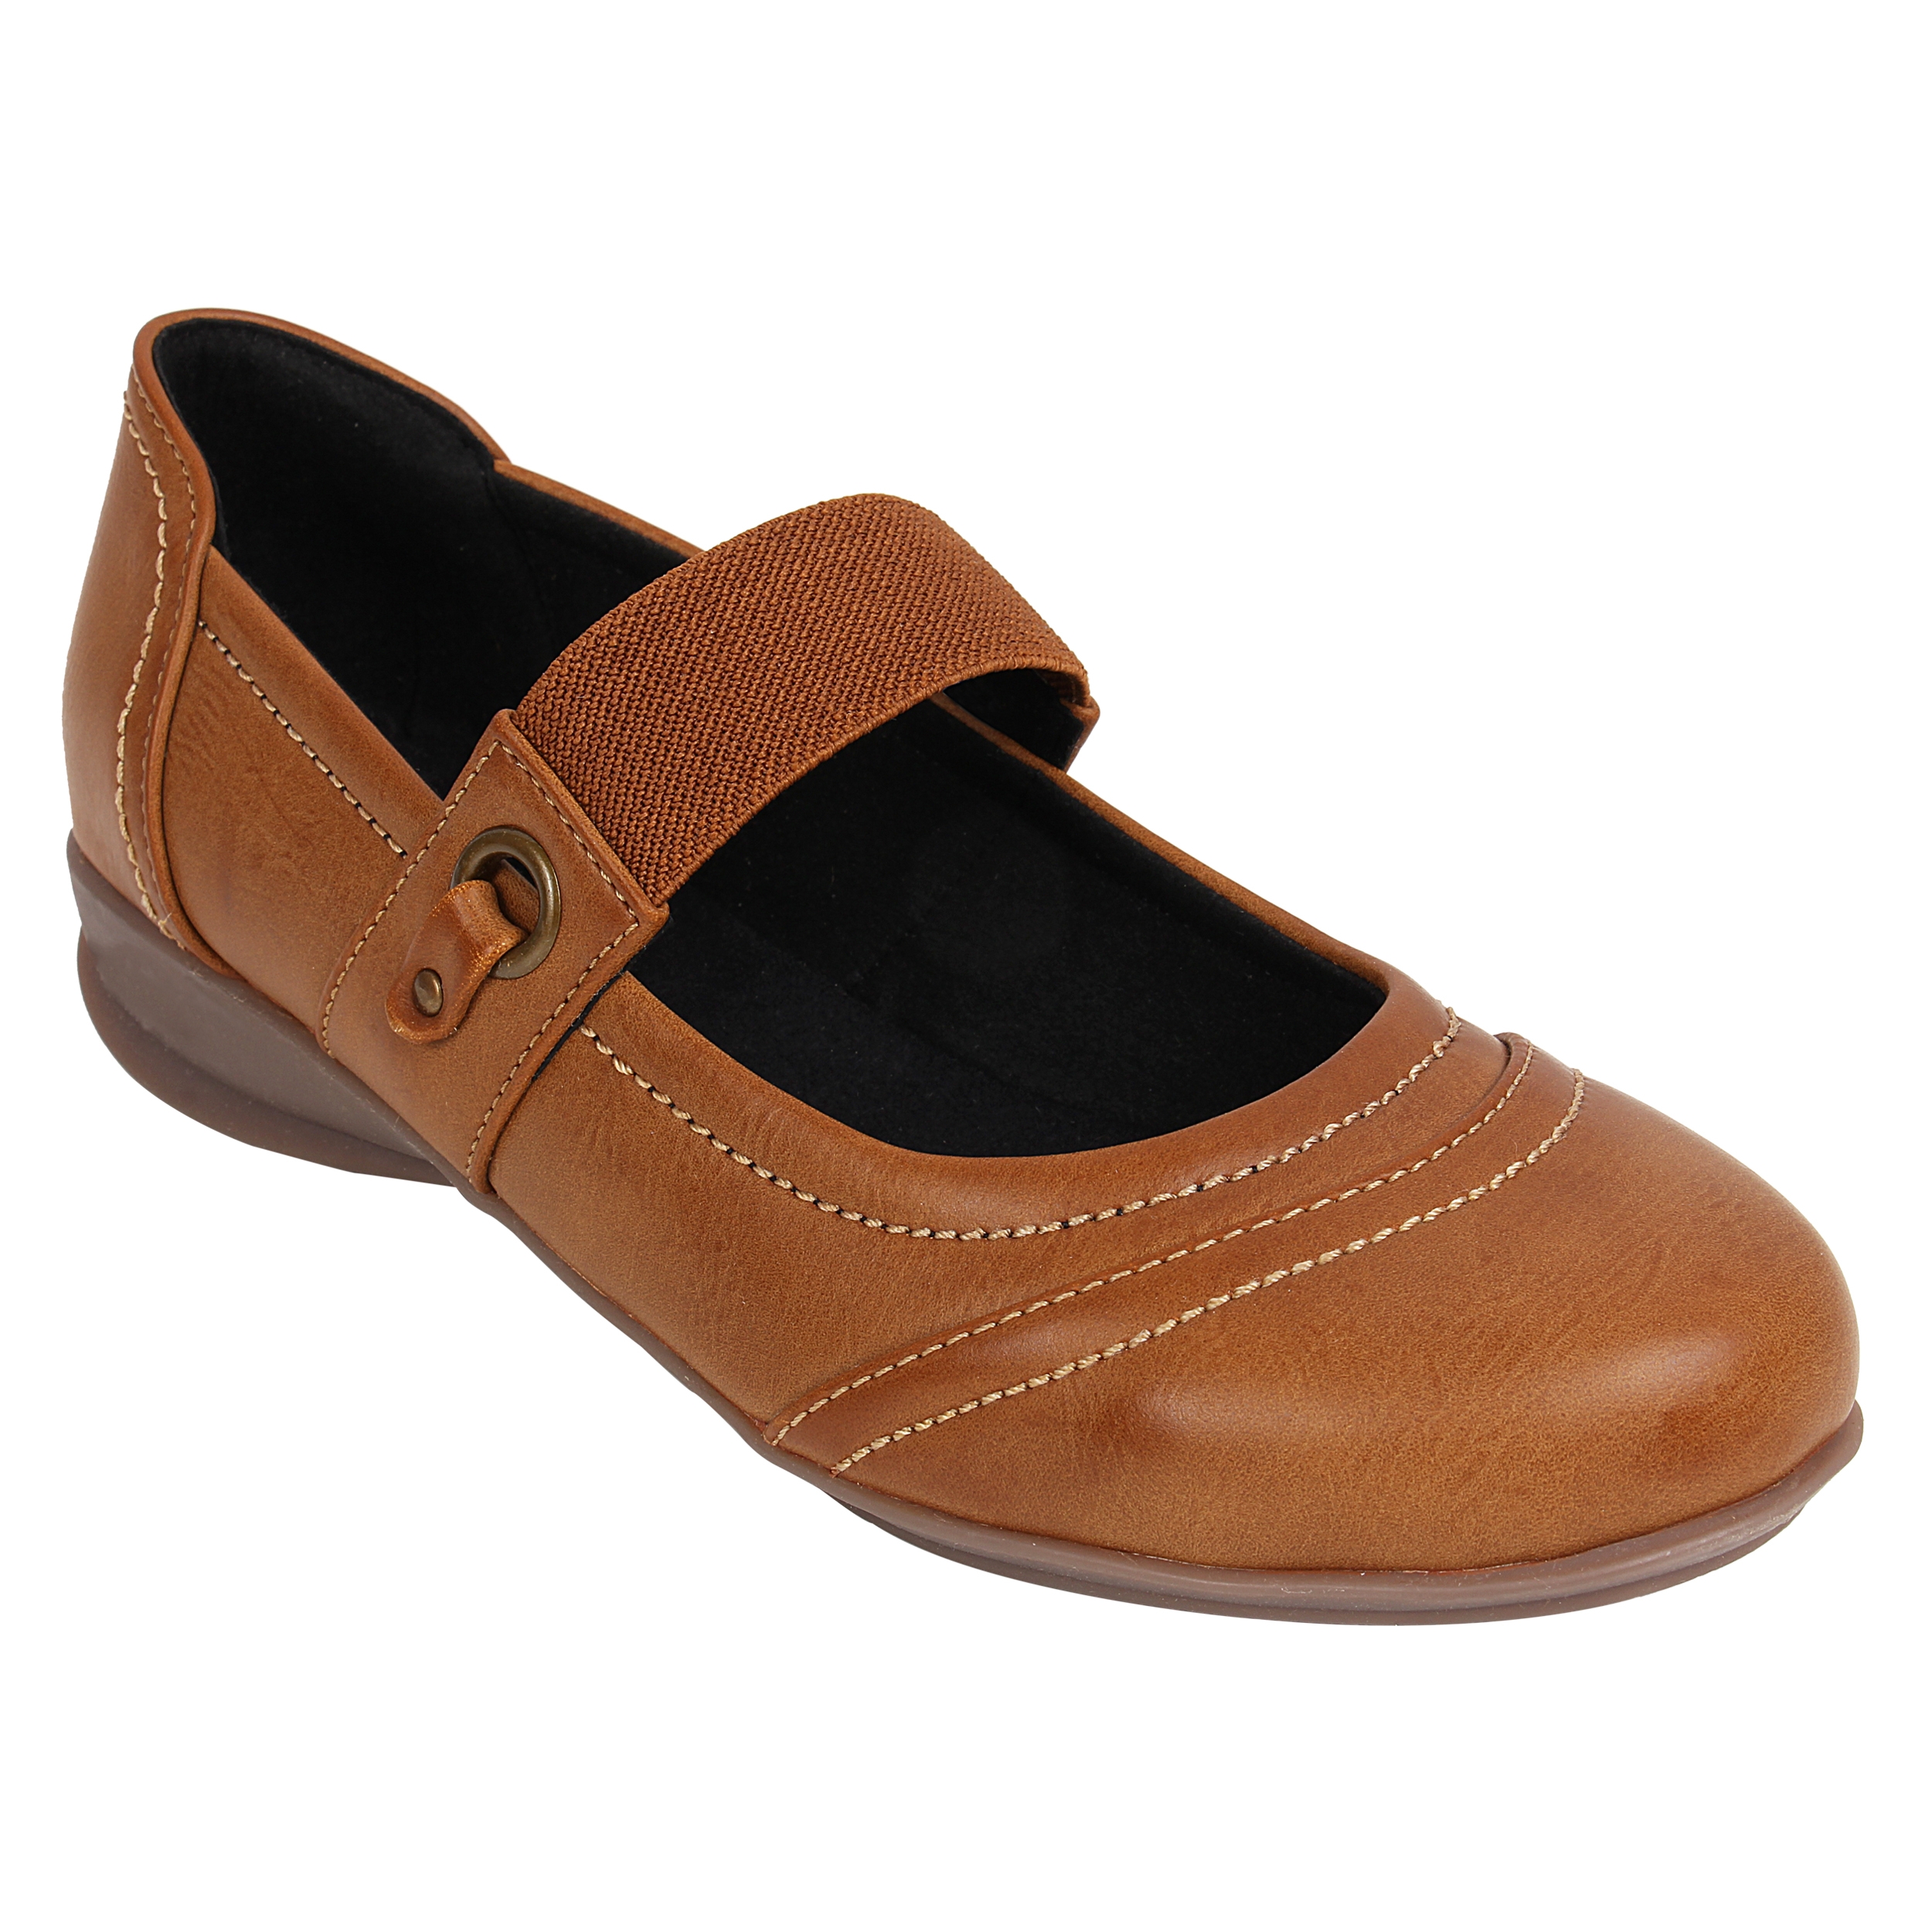 CATWALK | Comfy Mary Janes